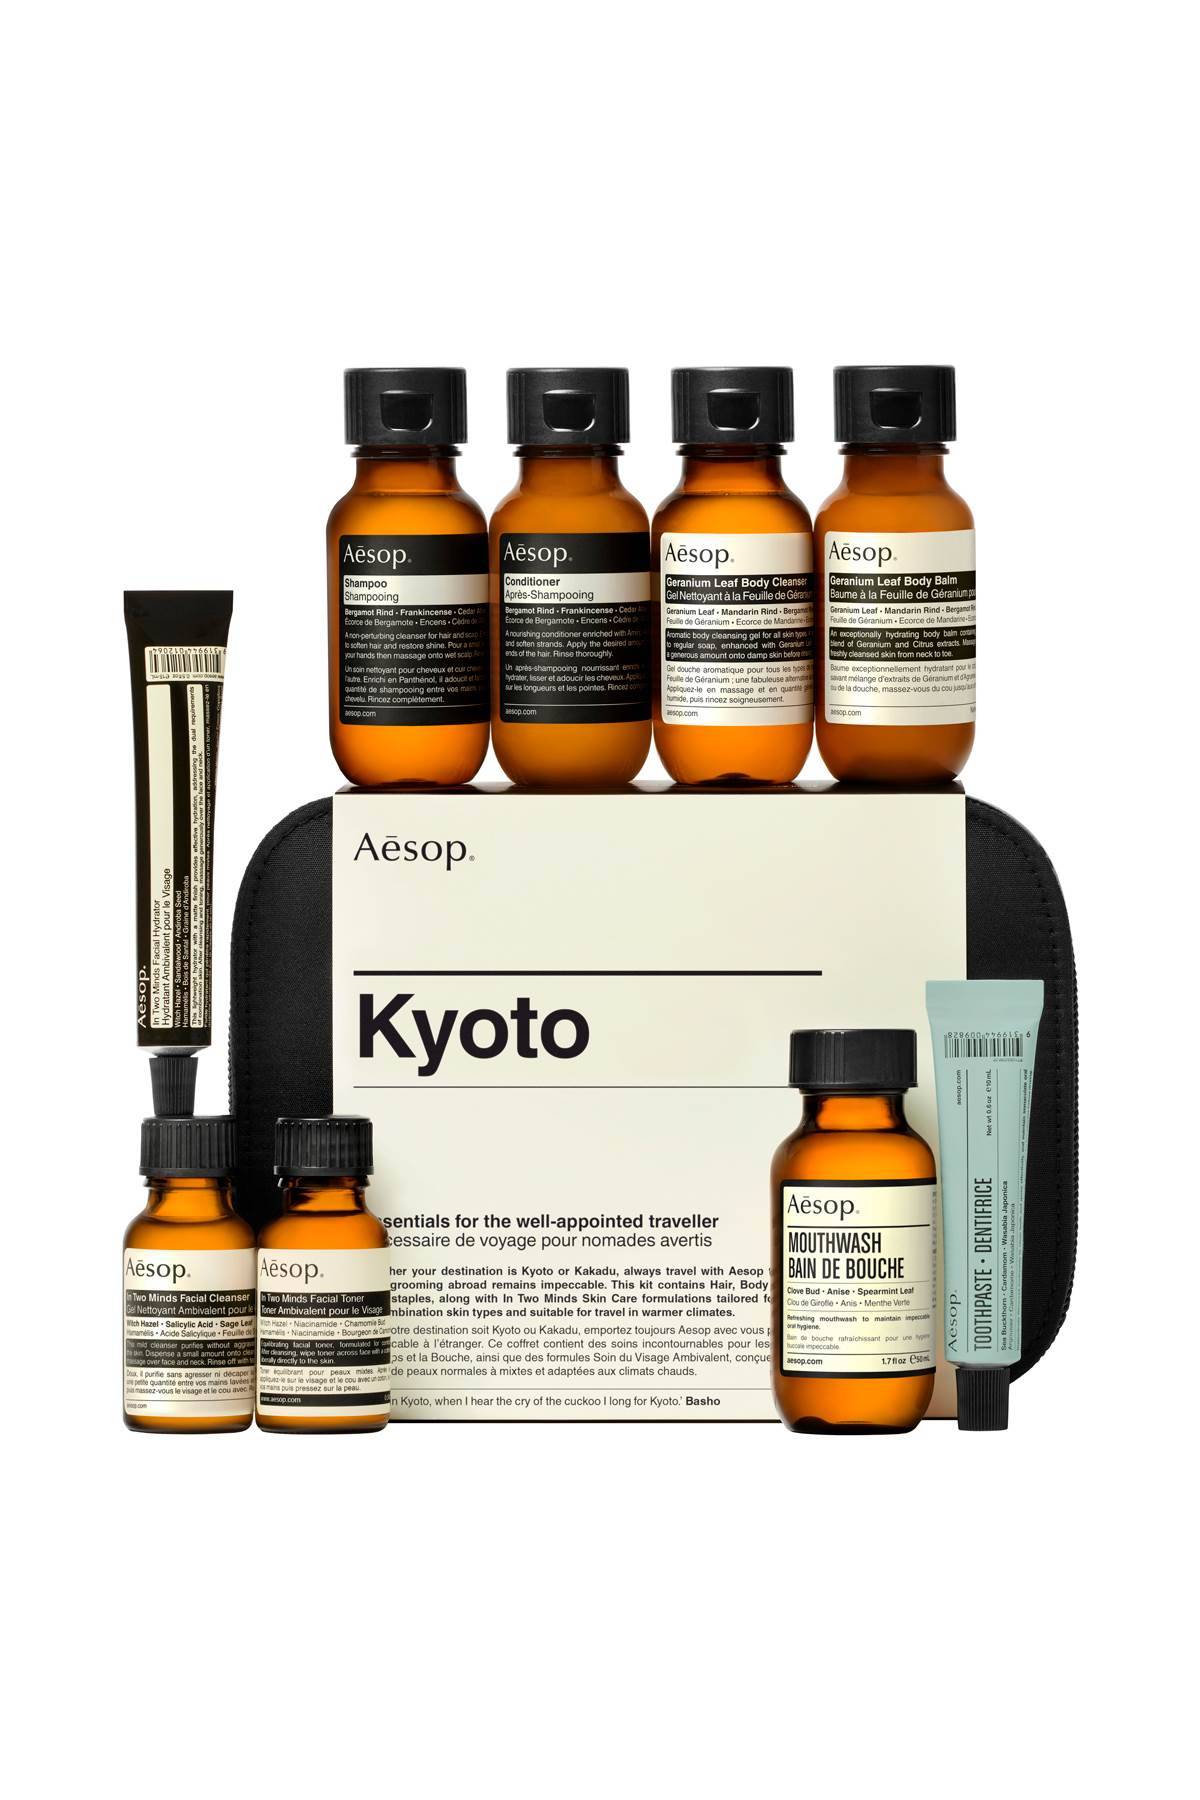 Aesop AESOP kyoto essentials for the well-appointed traveller - 10ml 3x15ml 5x50ml